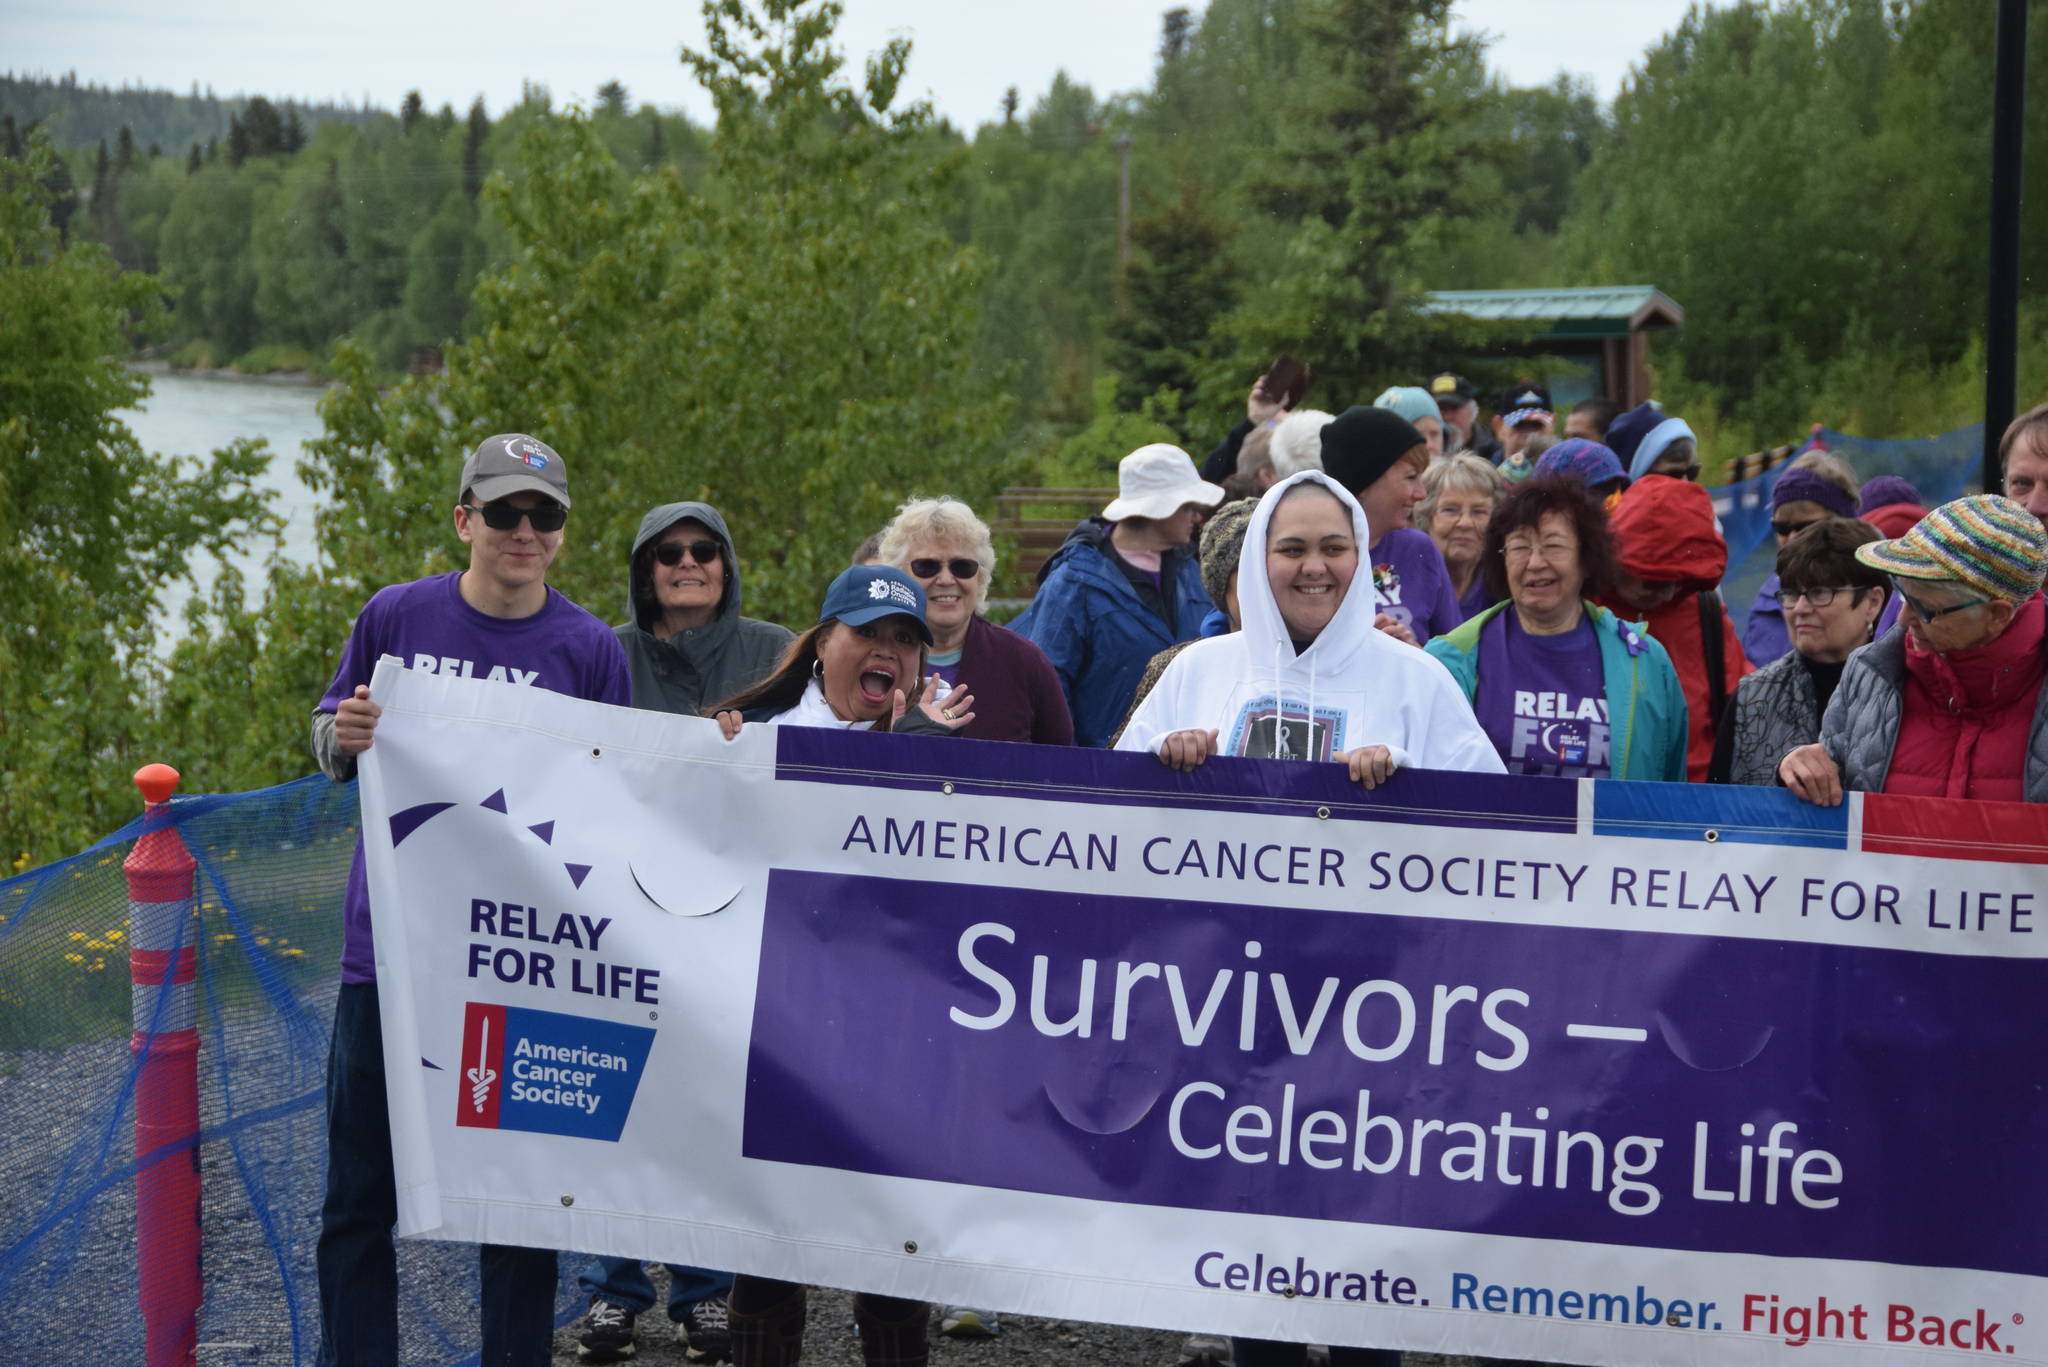 Participants at the 2019 Relay for Life of the Kenai Peninsula line up at Soldotna Creek Park on June 1, 2019 to start the survivor’s walk, which is designated for cancer survivors and their caretakers. All those wearing purple shirts are cancer survivors, including Joseph Yourkoski, far left, a 17 year old at Nikiski High School. Eighteen teams raised over $25,000 at this year’s event, which featured live entertainment, face painting and a pancake eating contest. (Photo by Brian Mazurek/Peninsula Clarion)